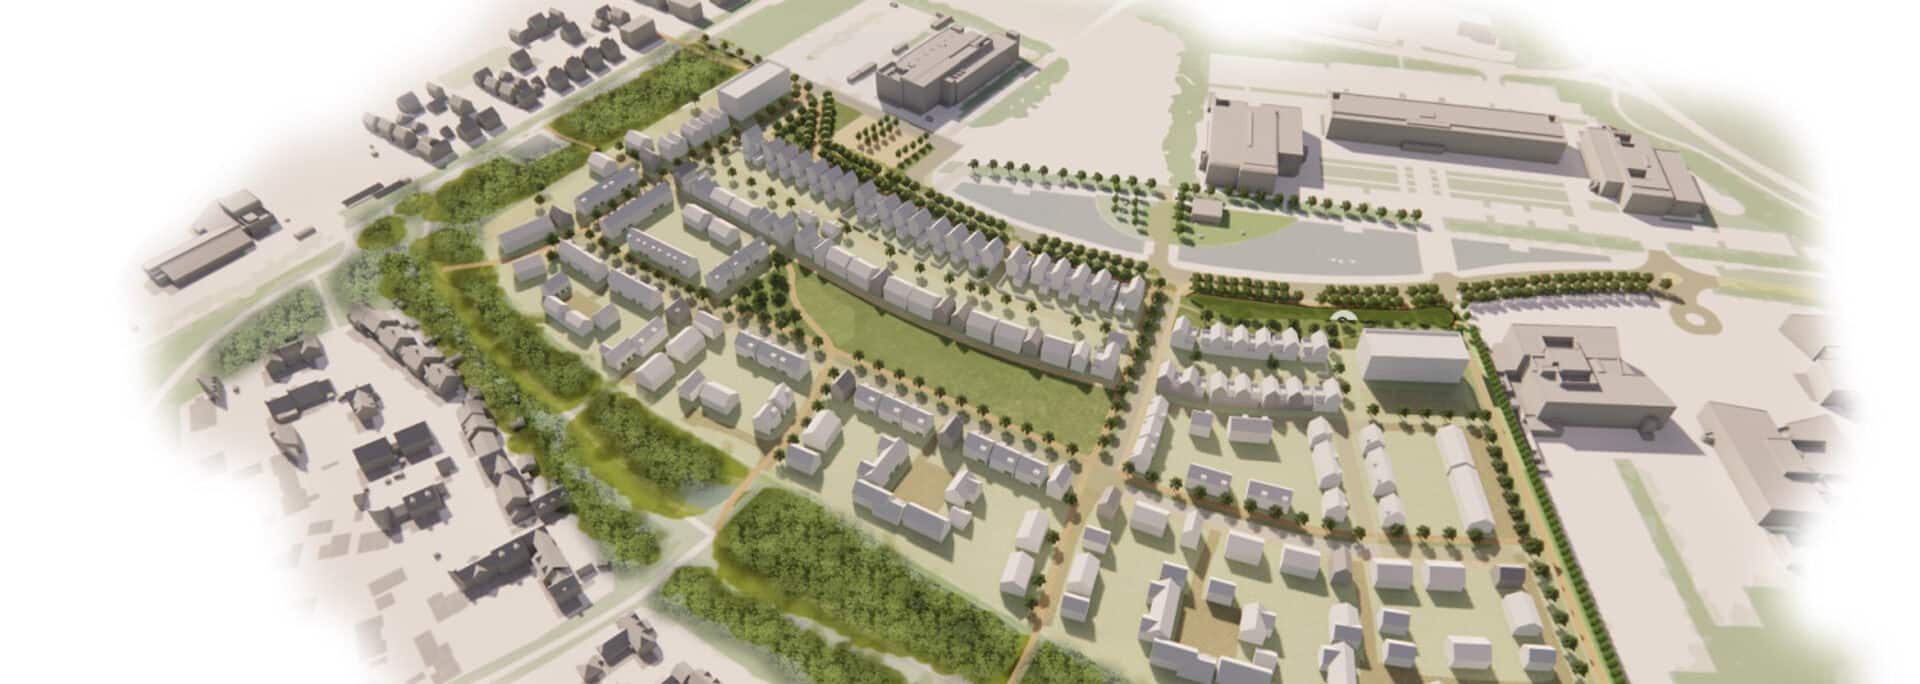 256 low-carbon homes in Cambourne